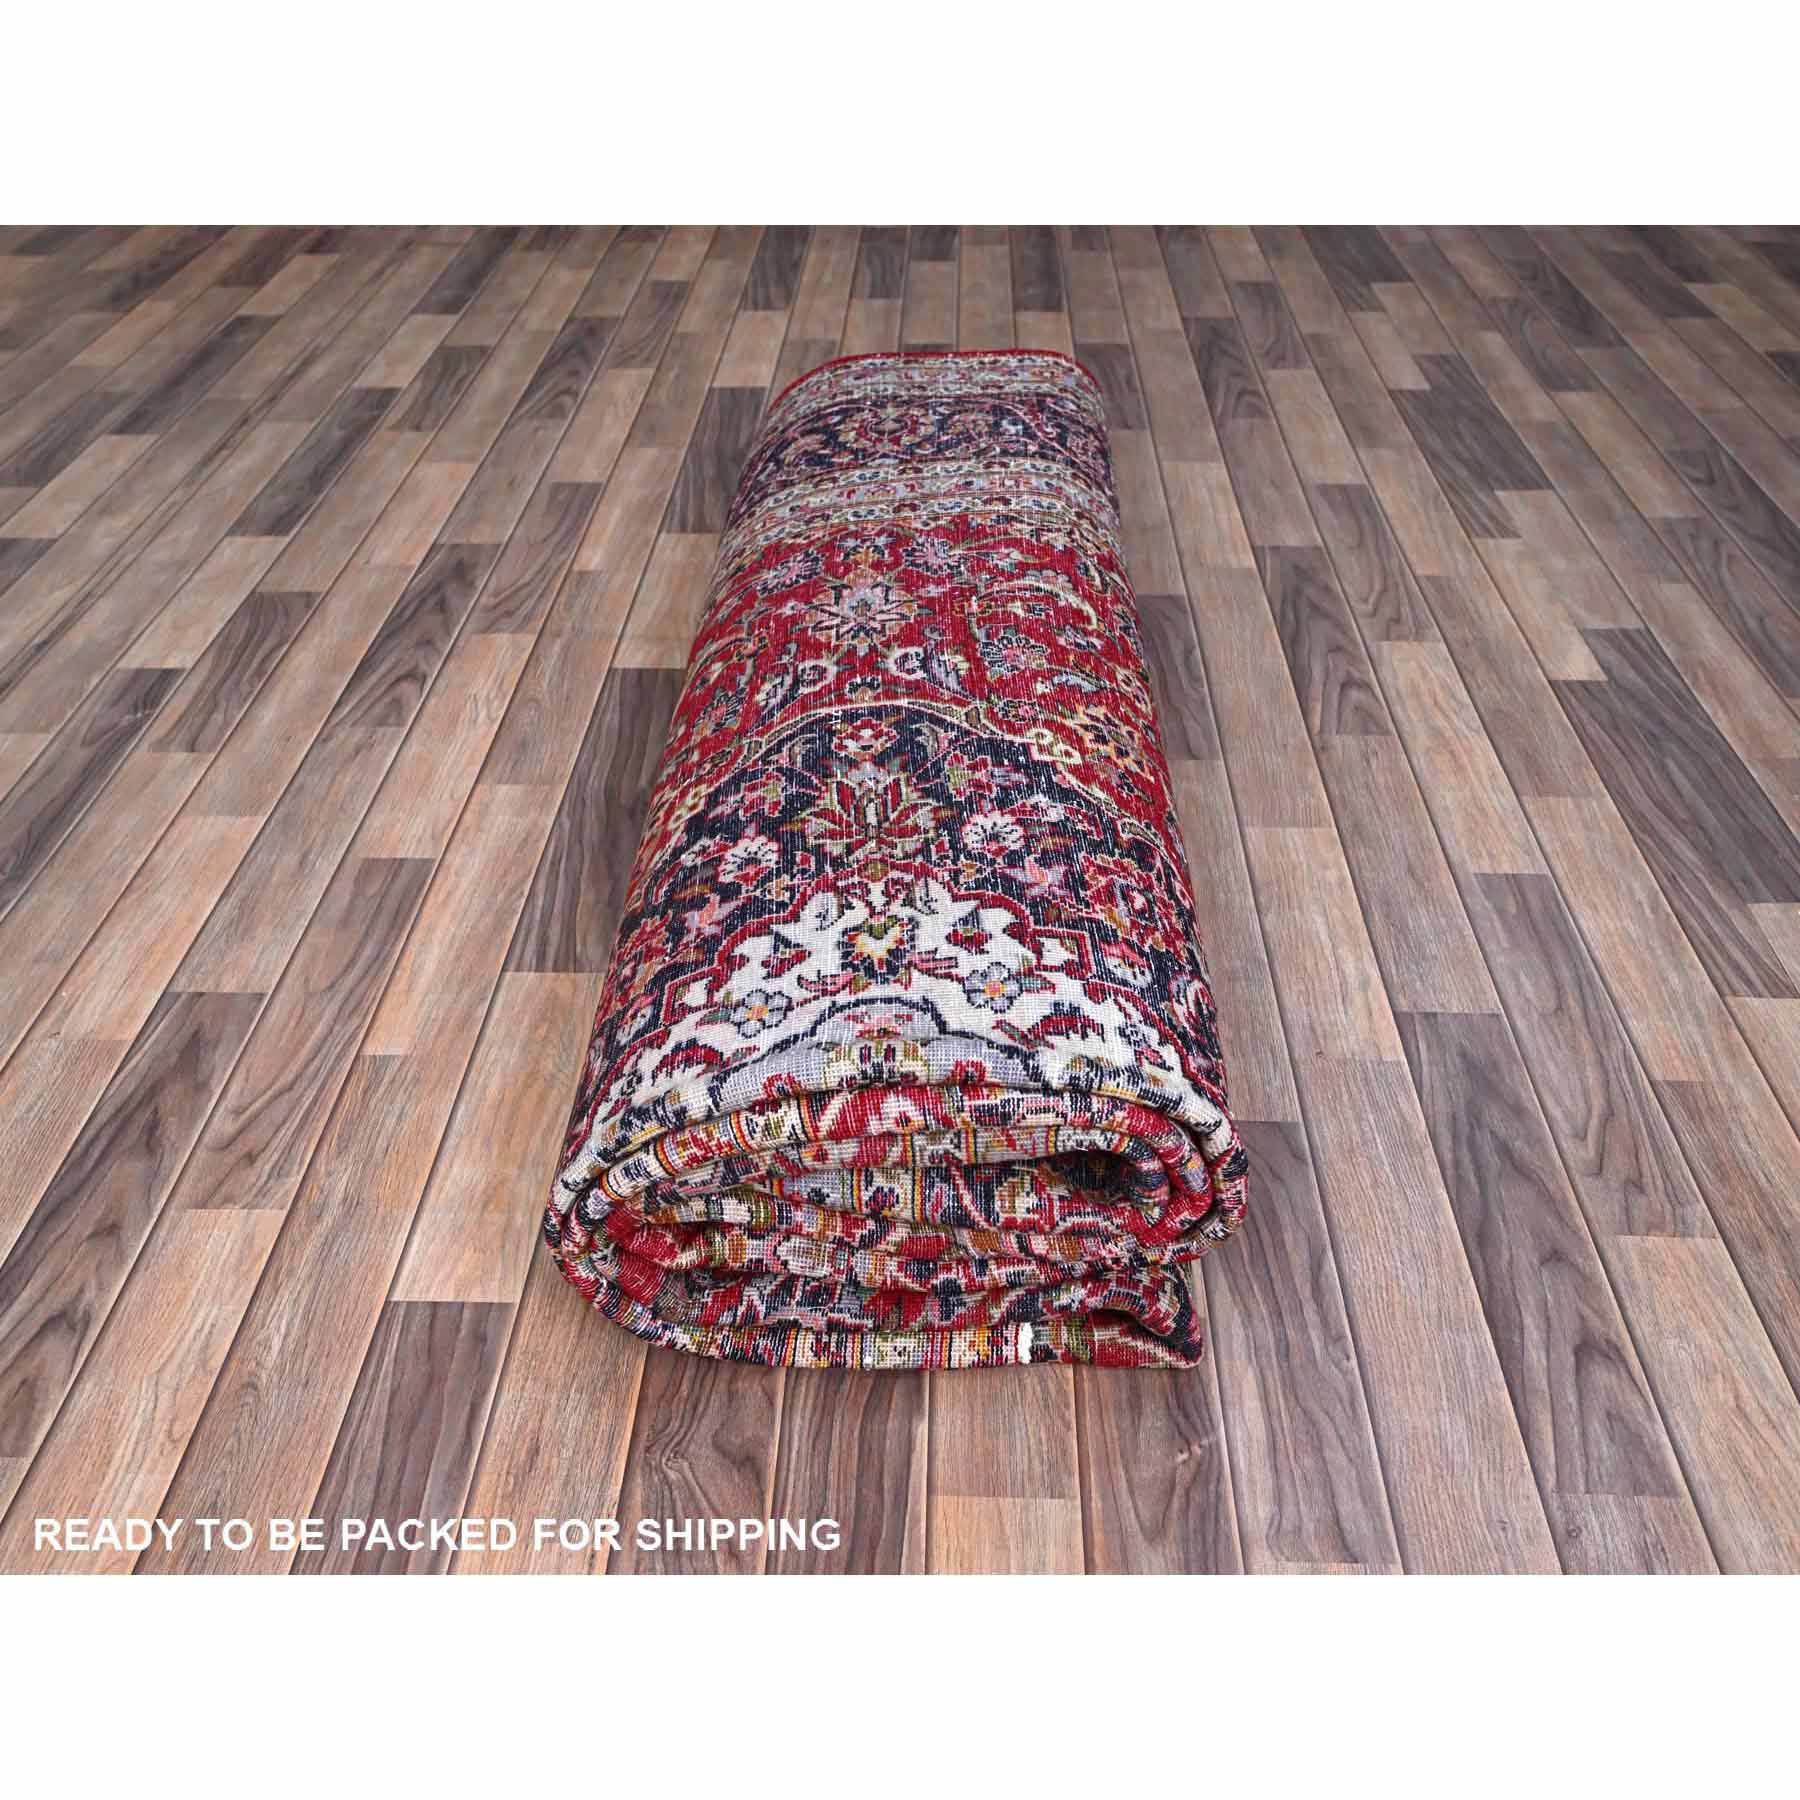 Persian-Hand-Knotted-Rug-433480